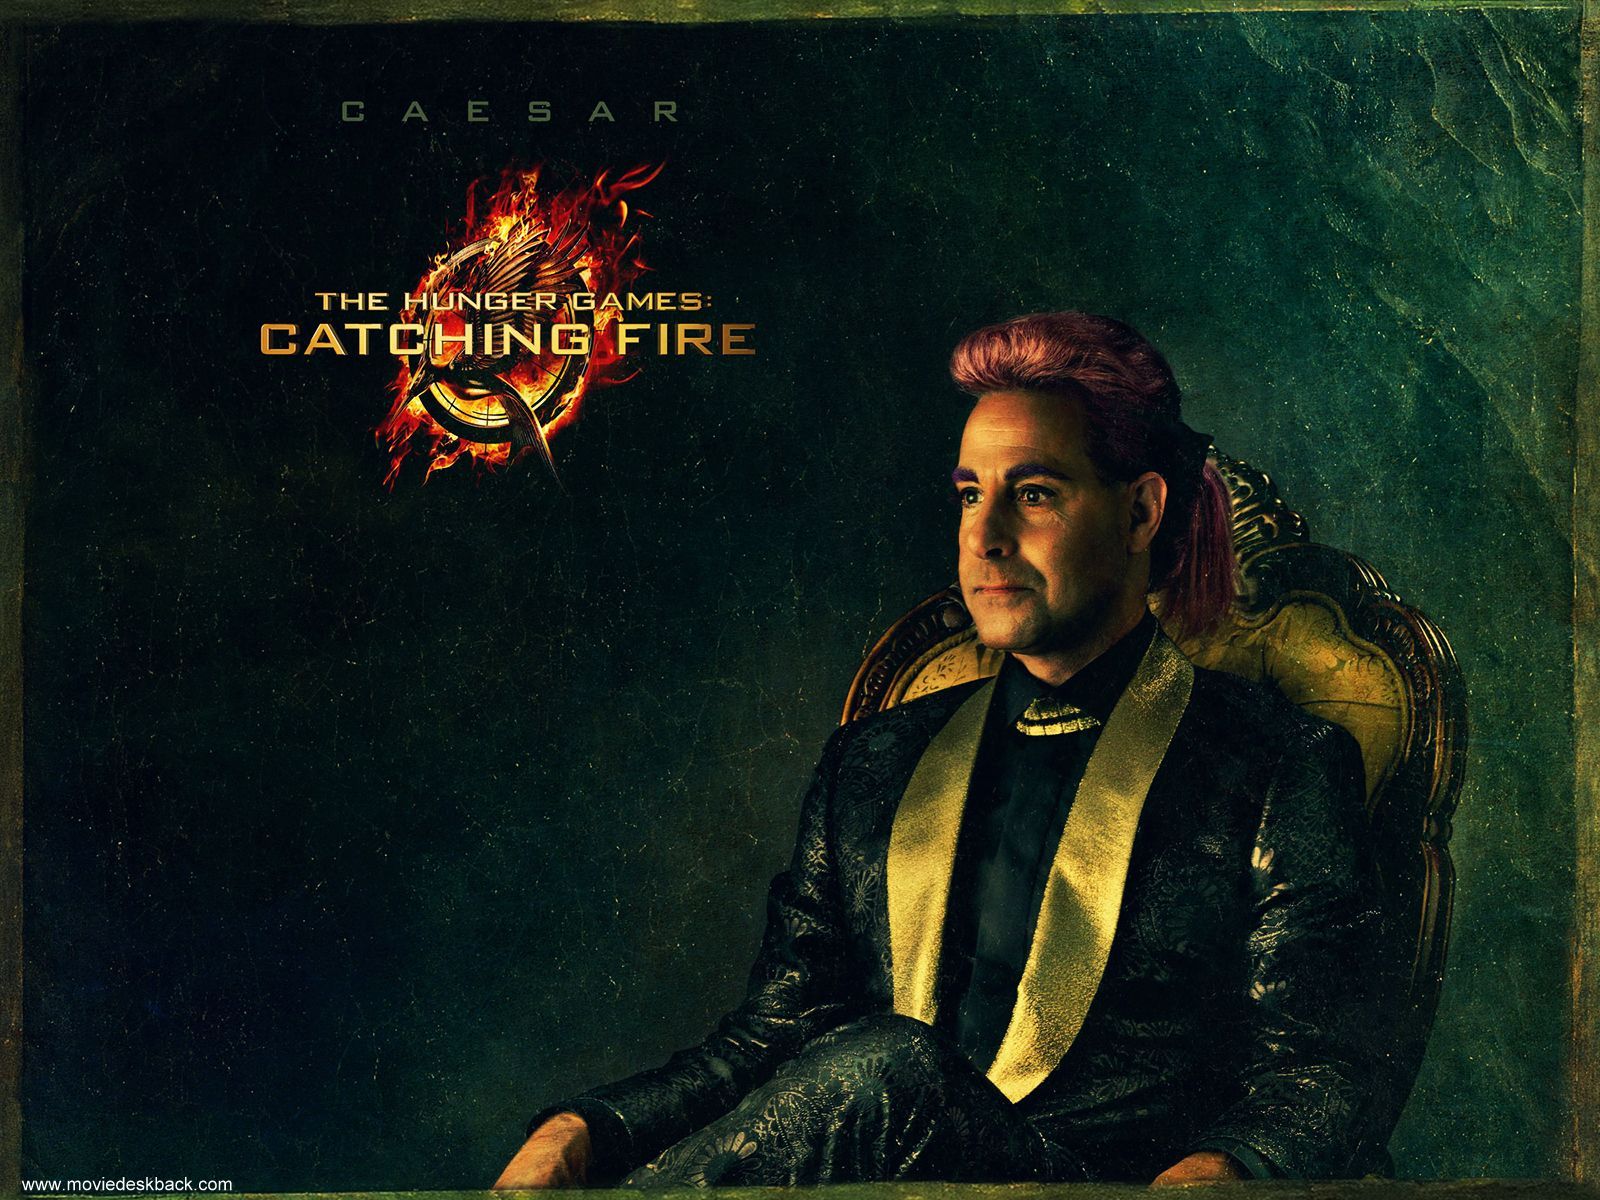 the hunger games catching fire Caesar Flickerman. Hunger games catching fire, Catching fire, Hunger games